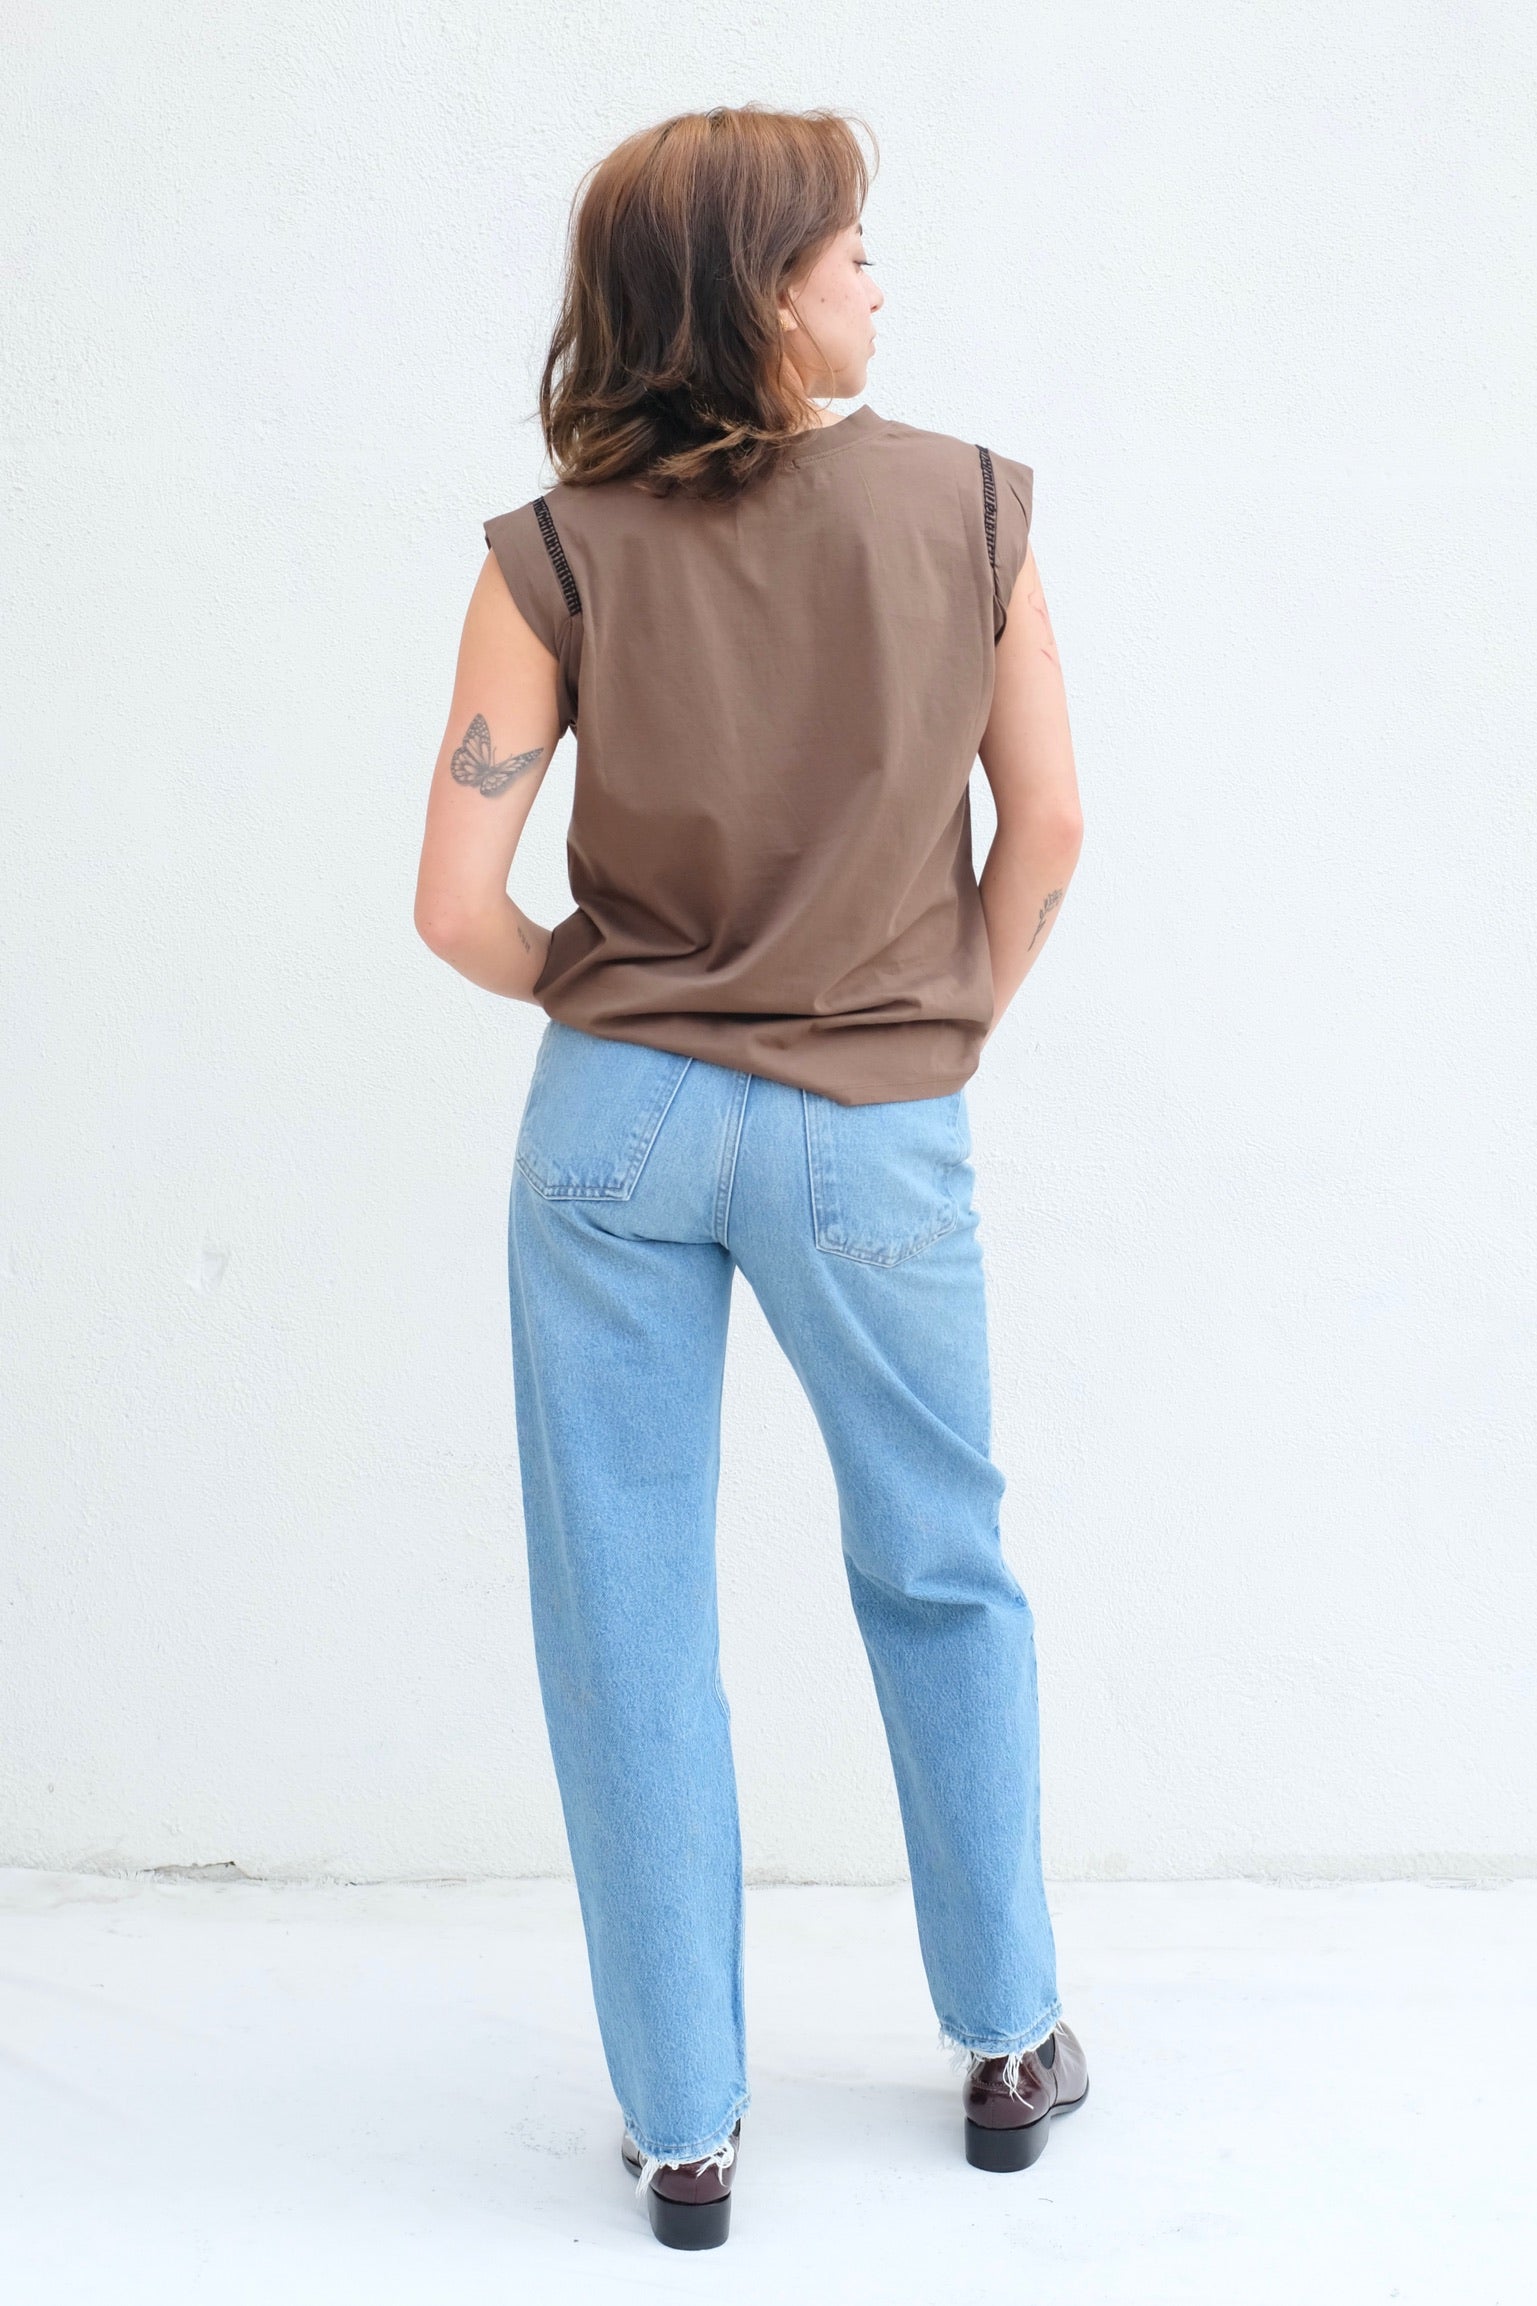 The 2-in-1 design has a significant effect on waist and chest,Hides Ba